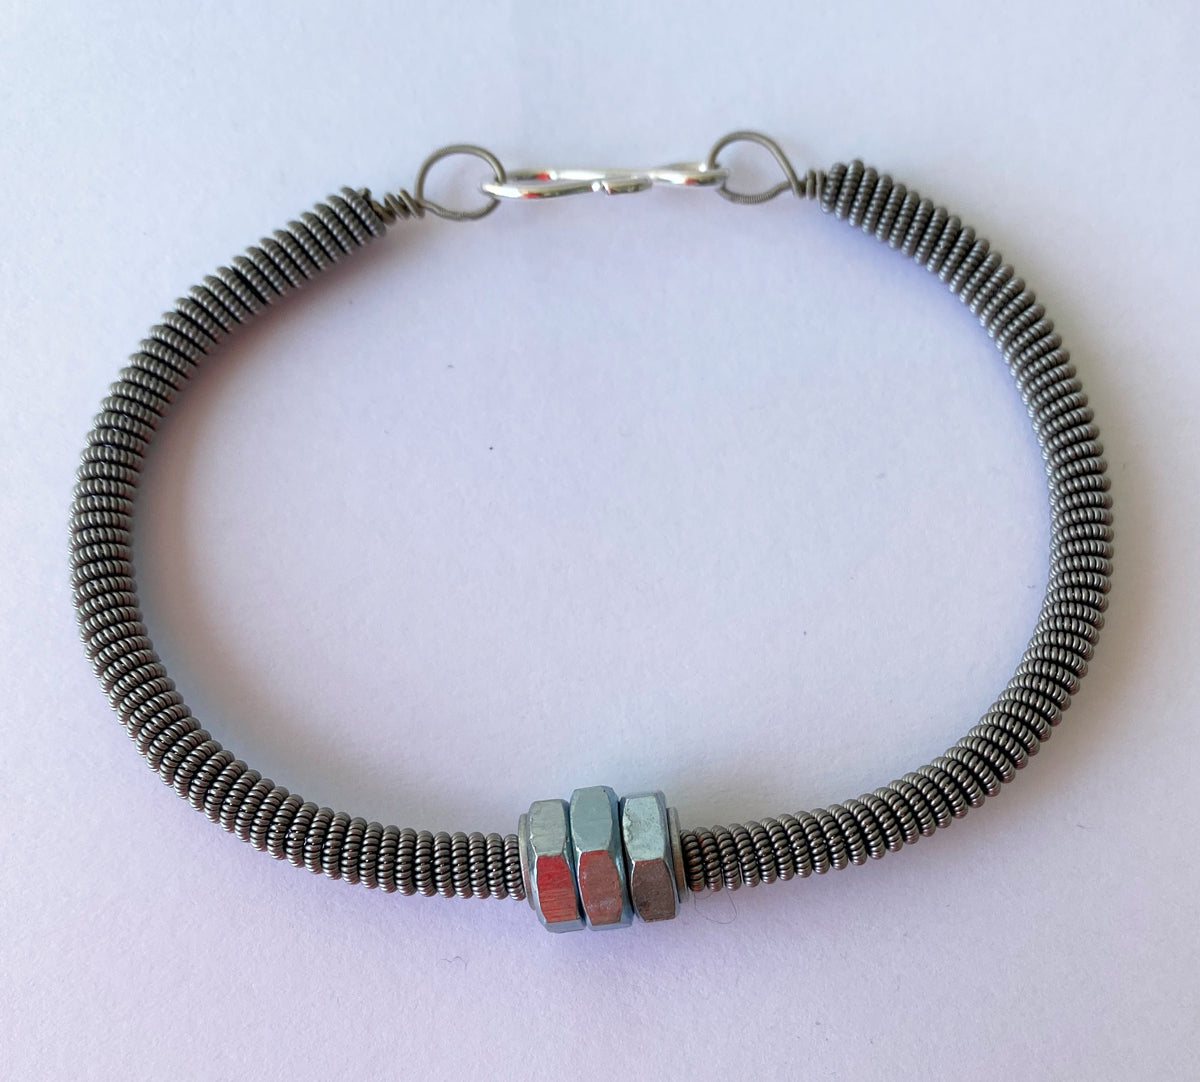 57. Stainless Steel Guitar String with Bolts Bracelet